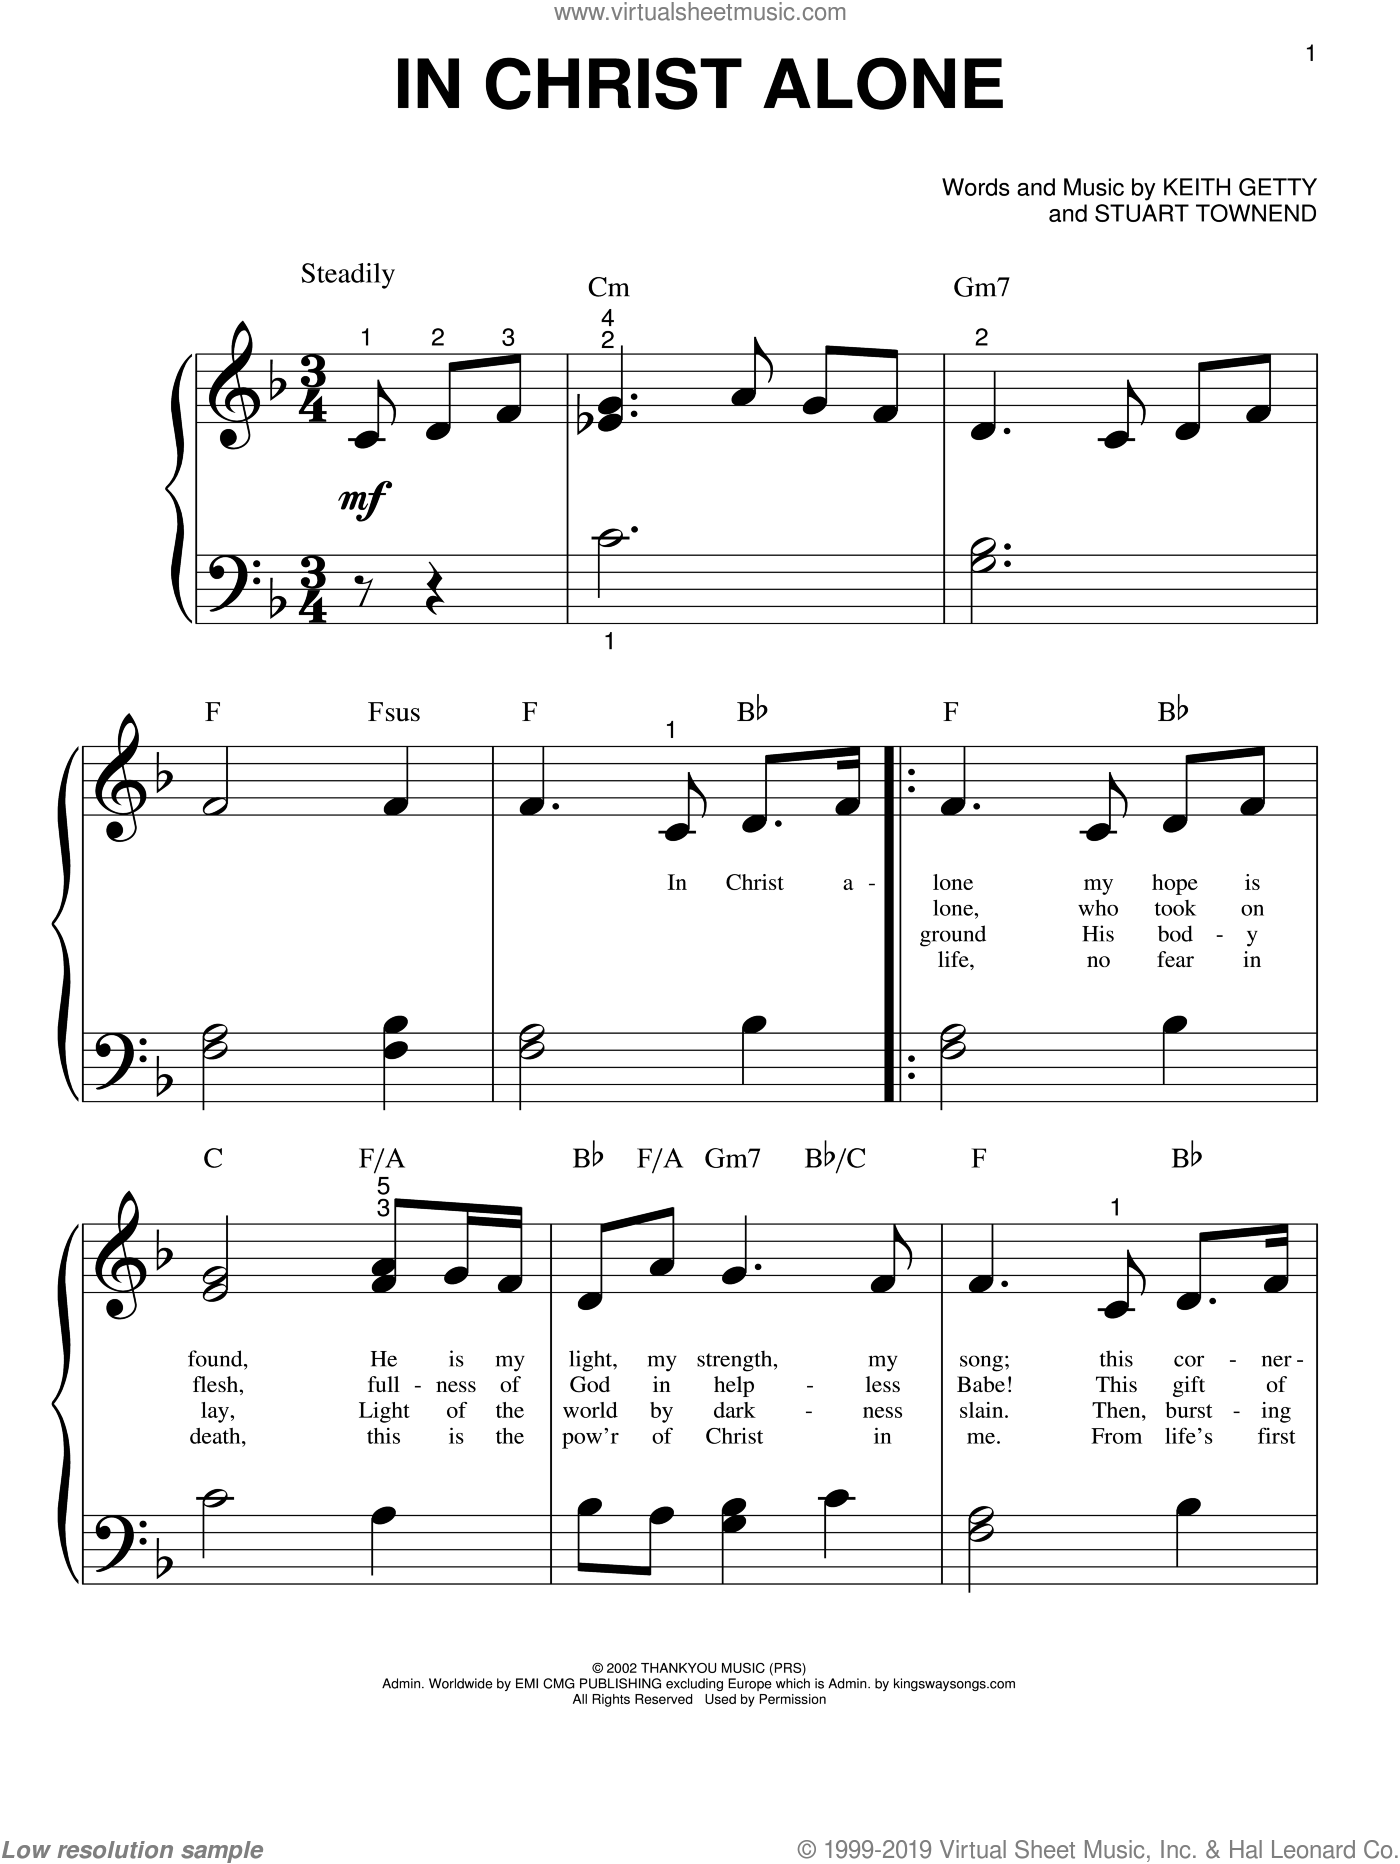 Newsboys - In Christ Alone sheet music for piano solo (big note book)